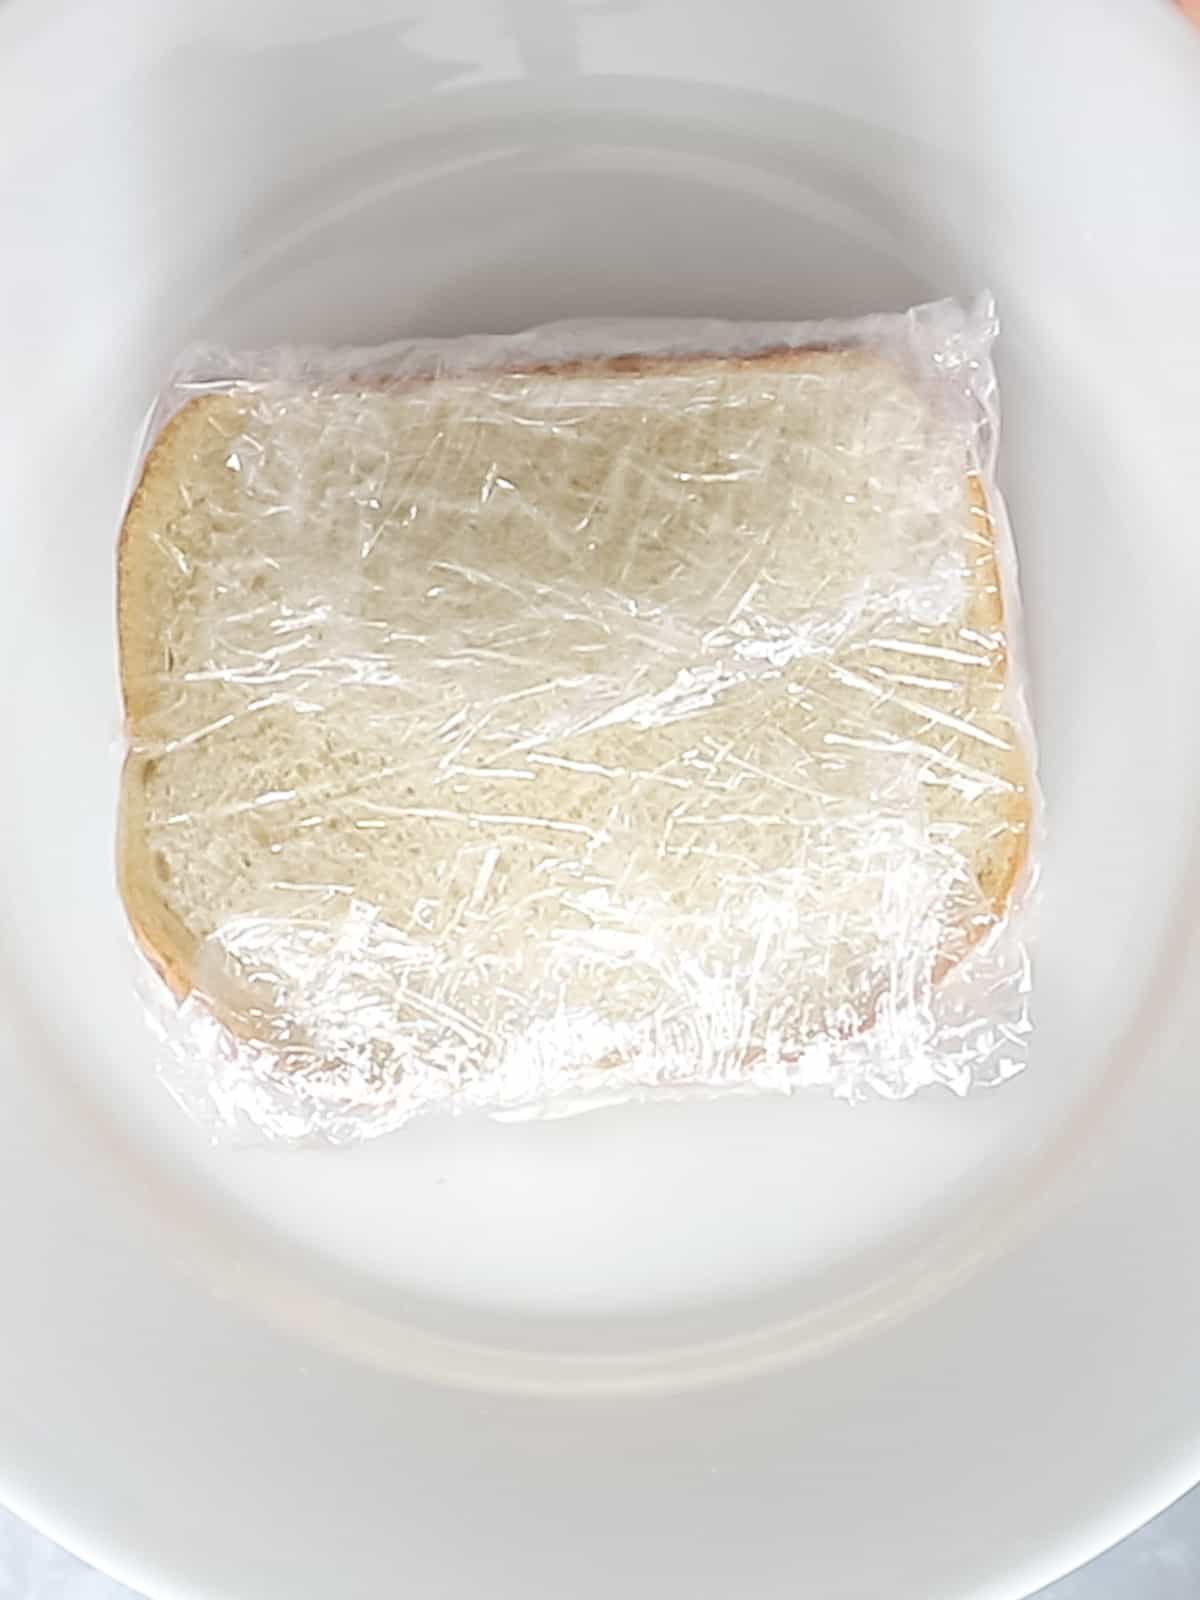 Japanese fruit sandwich wrapped in plastic wrap on a white plate.